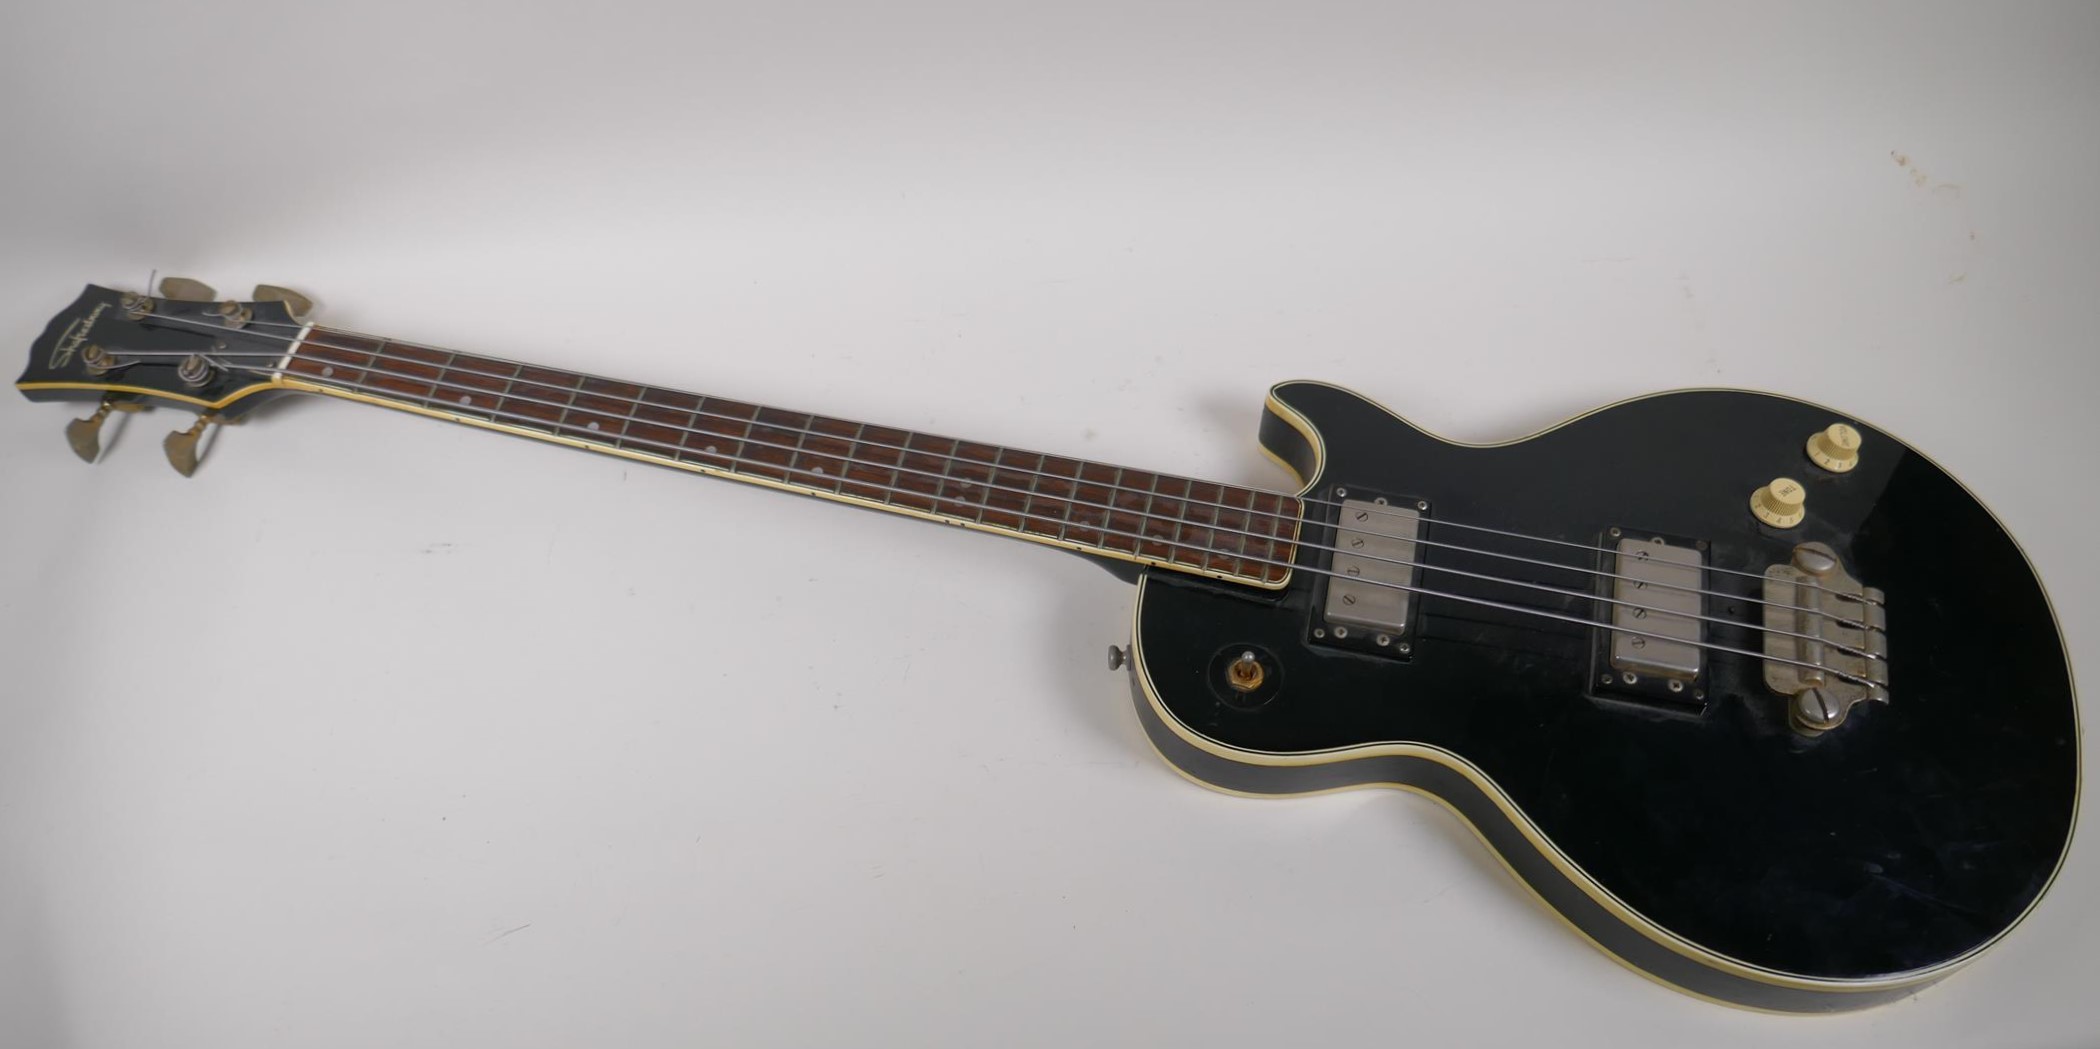 A vintage Japanese built Shaftesbury bass guitar with Les Paul shaped body, 110cm long